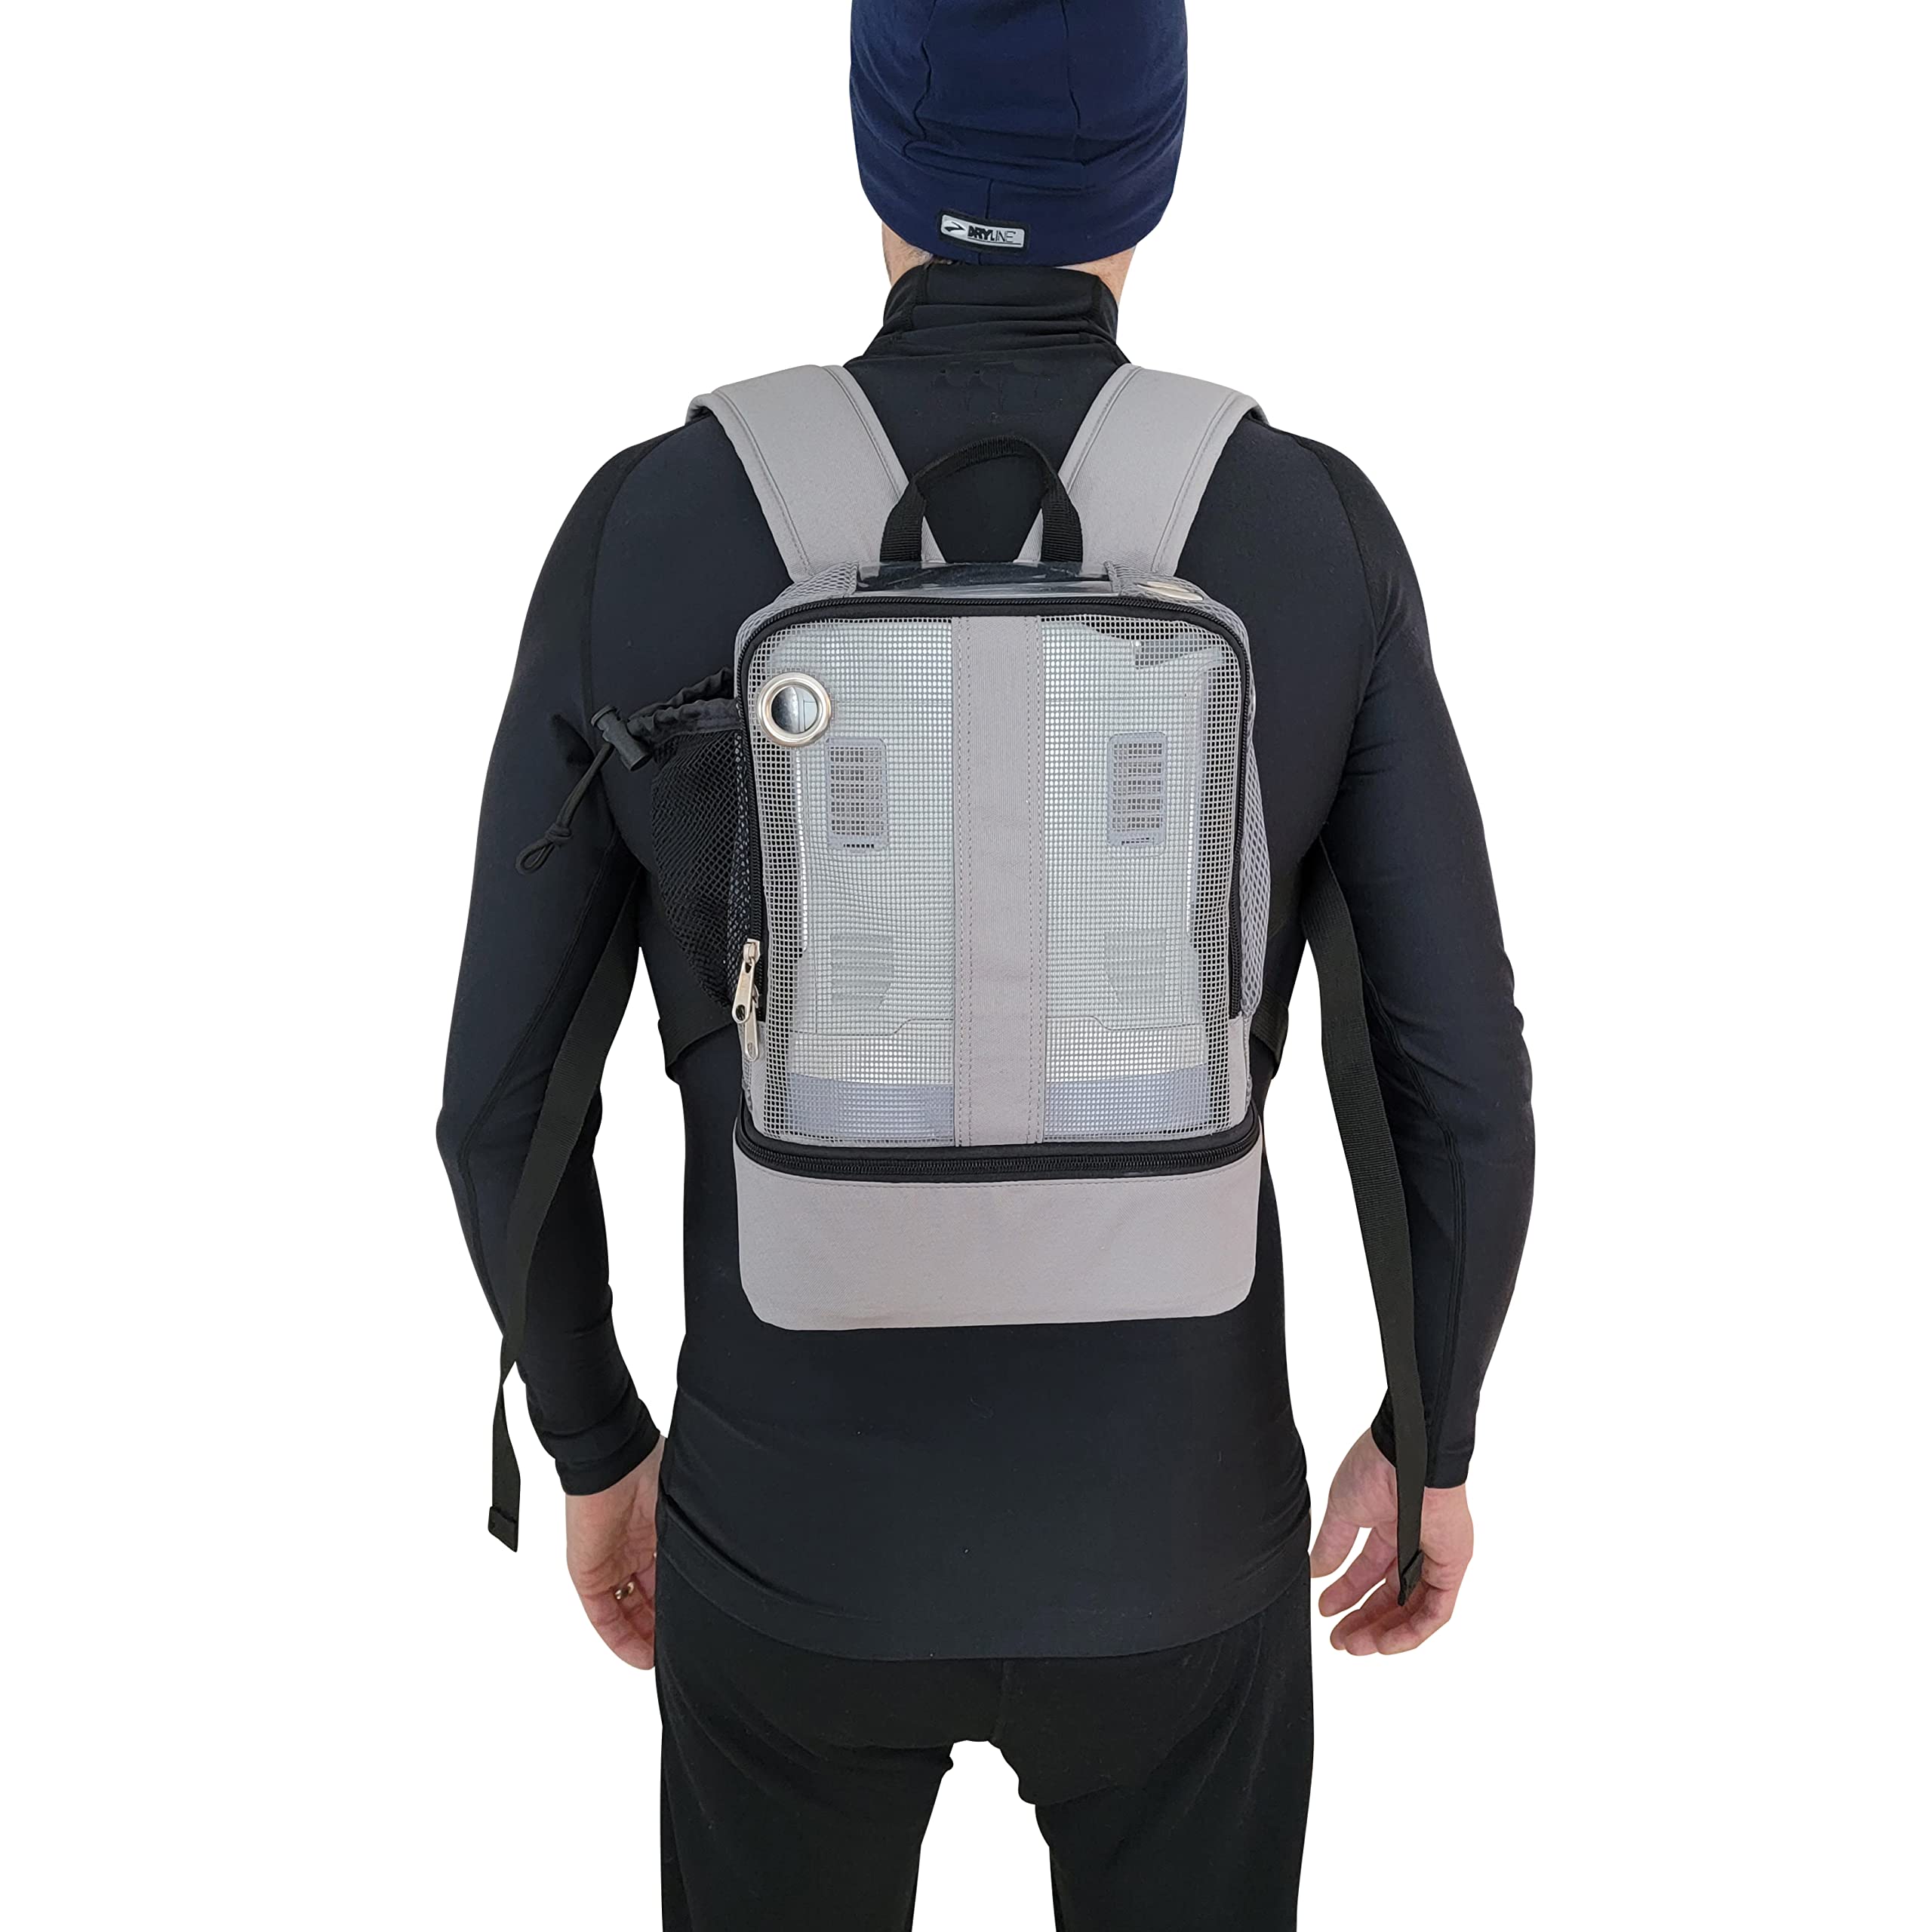 Dialogue Shilling systematic Universal Mesh Backpack For: Inogen One G3, Inogen One G5, OxyGo, Cair